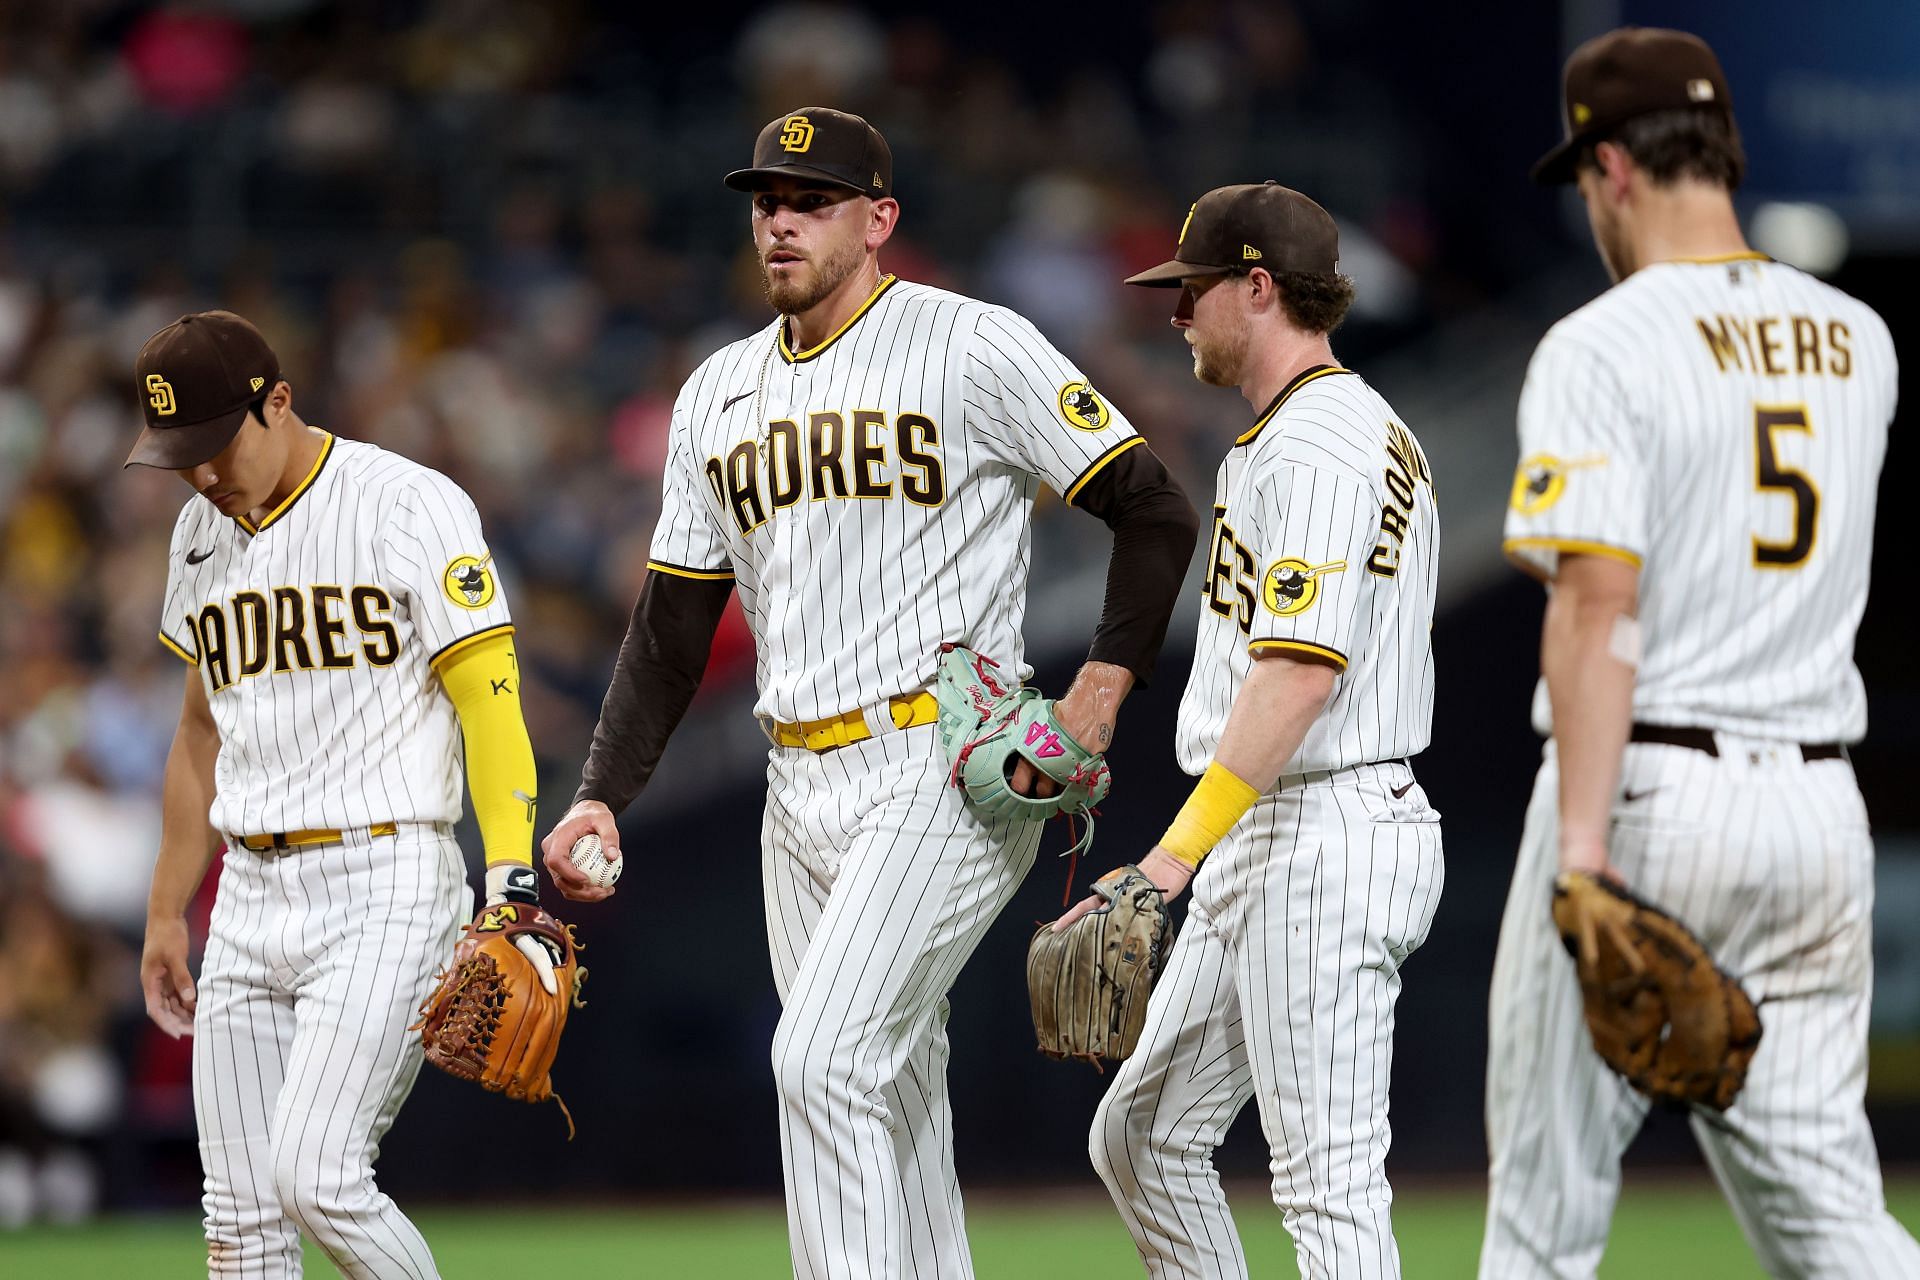 Padres: 1 fatal flaw San Diego must address in final month before